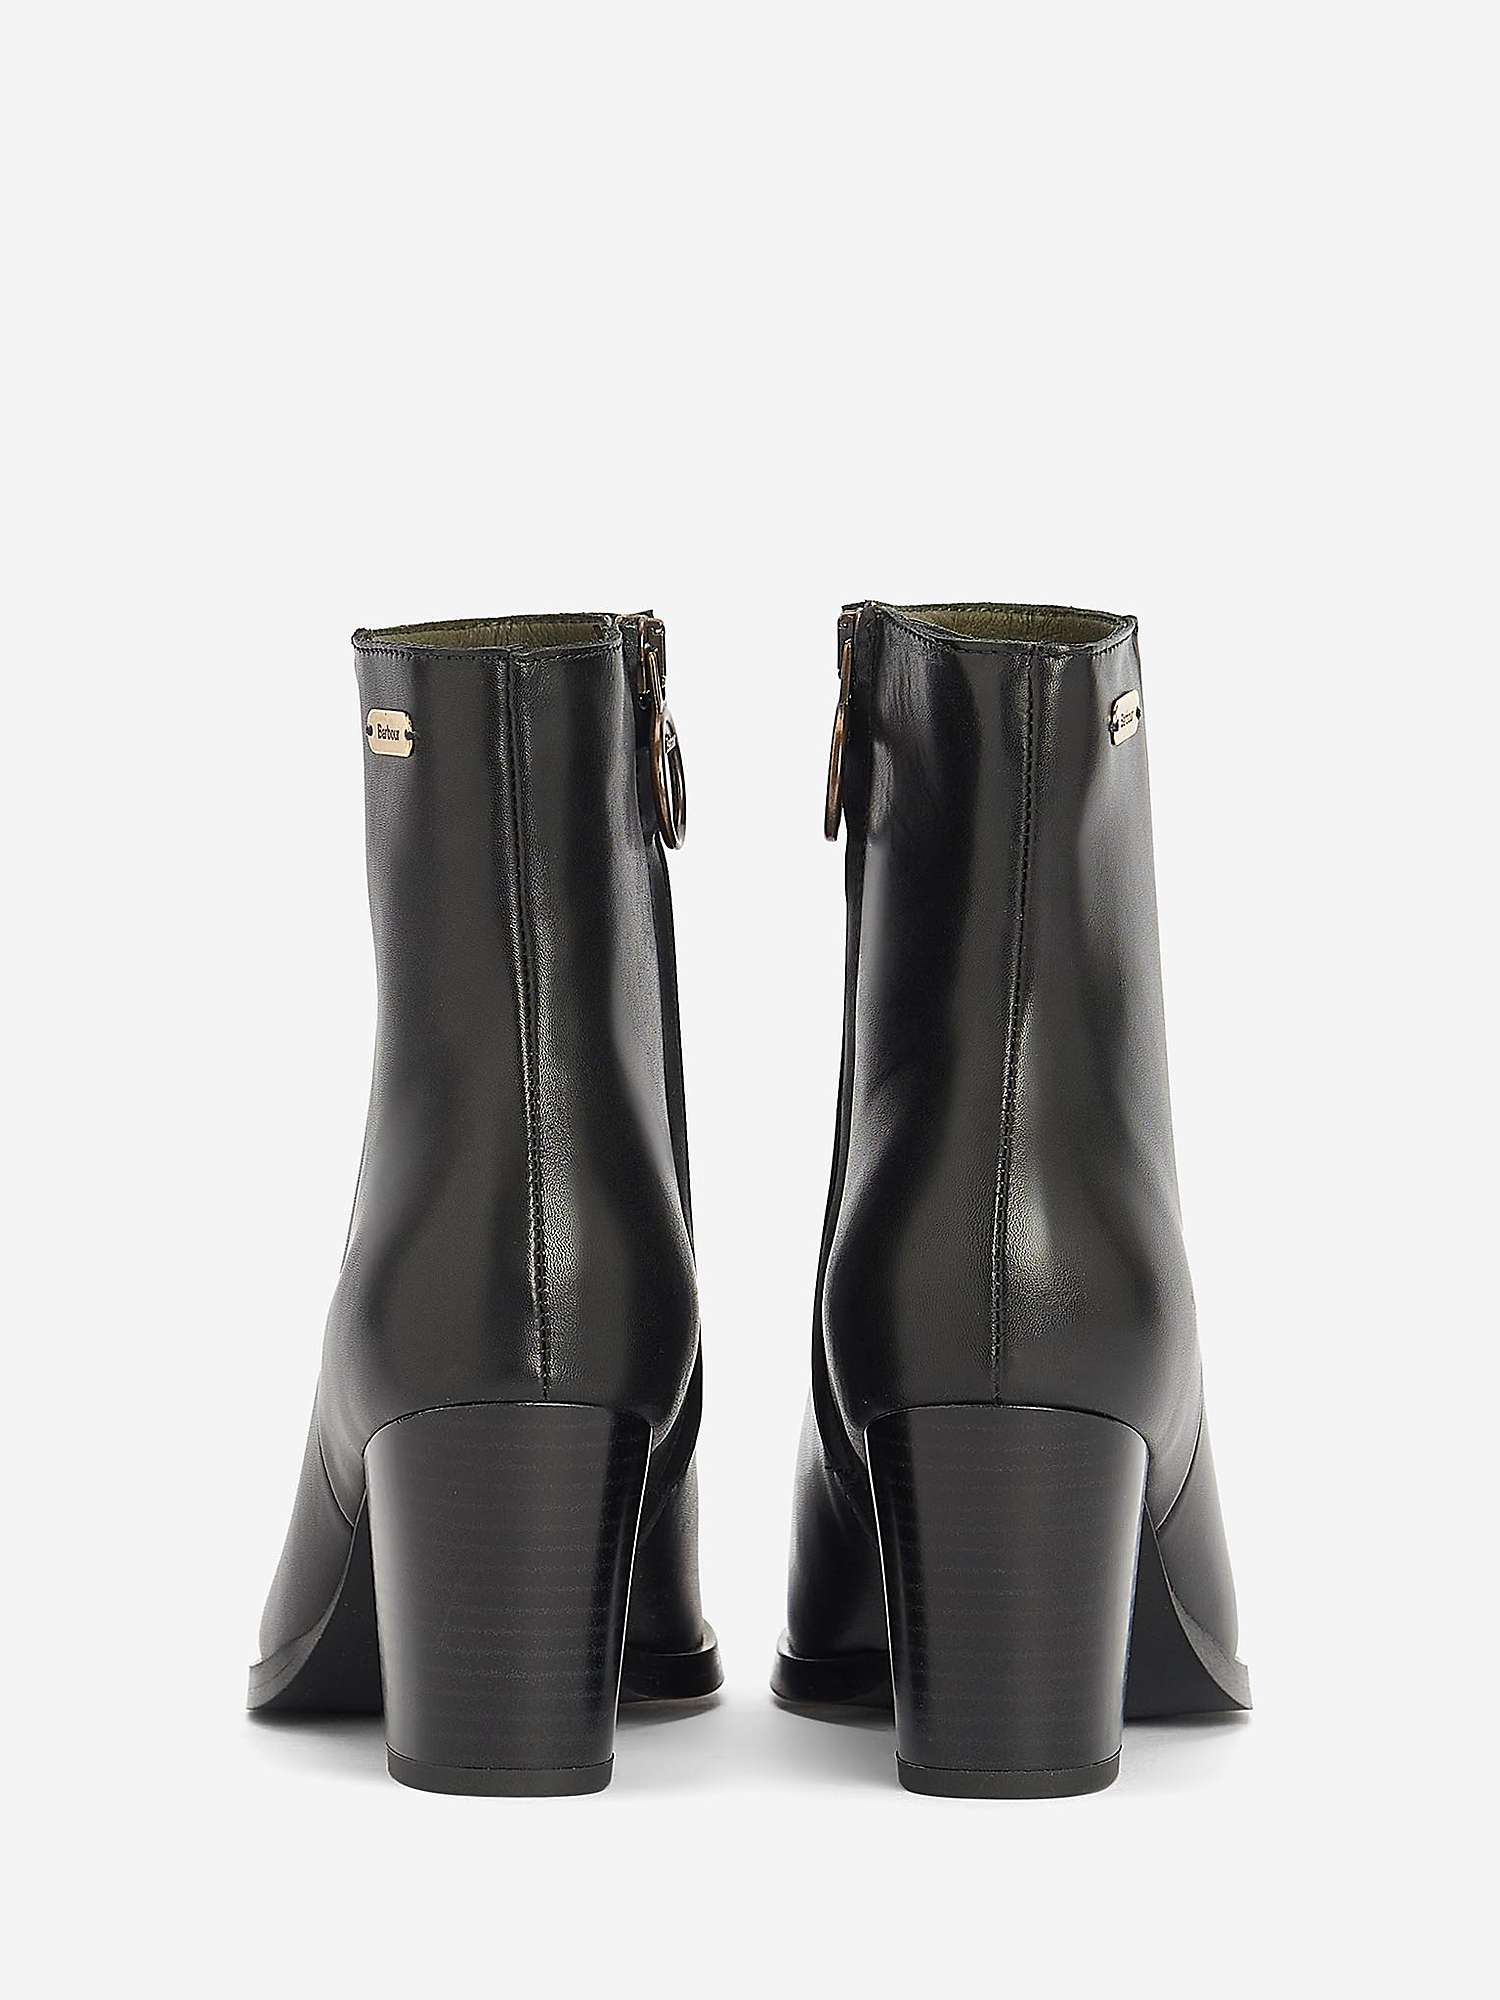 Buy Barbour Amelia Leather Ankle Boots, Black Online at johnlewis.com